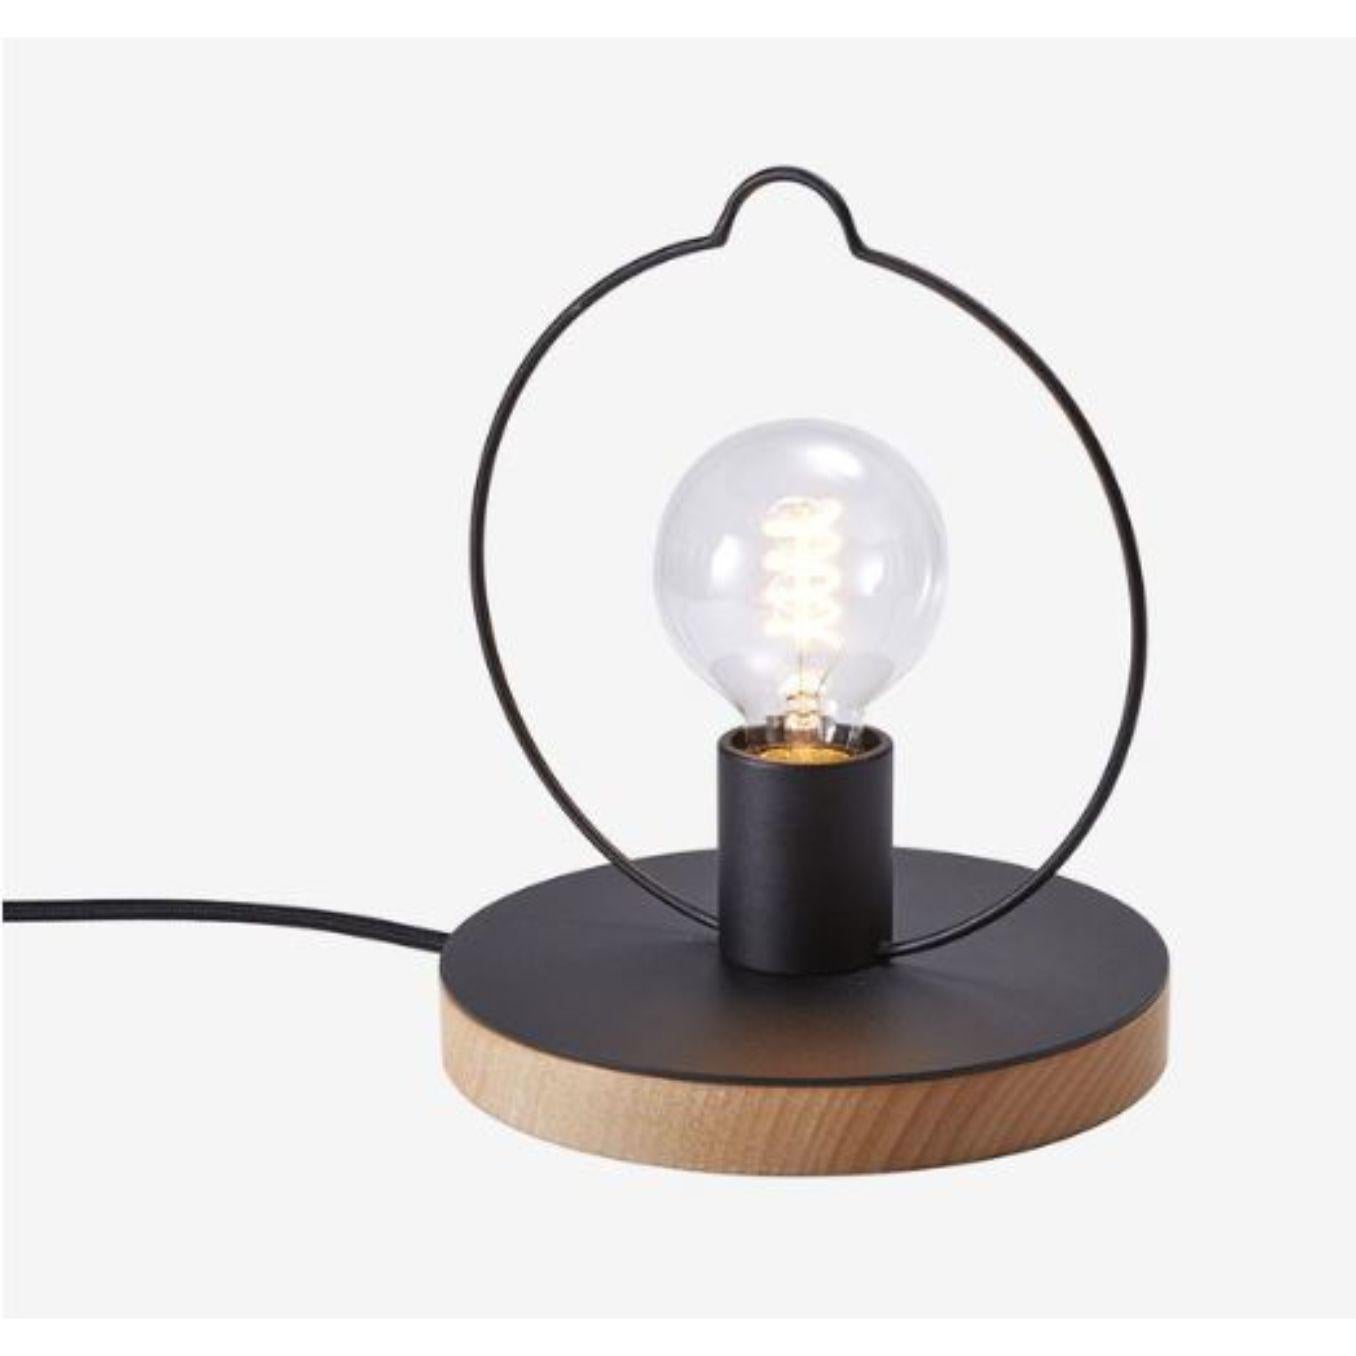 Gipsy table lamp by Radar.
Design: Bastien Taillard.
Materials: Metal, fabric, oak.
Dimensions: W 20 x D 20 x H 23 cm.

All our lamps can be wired according to each country. If sold to the USA it will be wired for the USA for